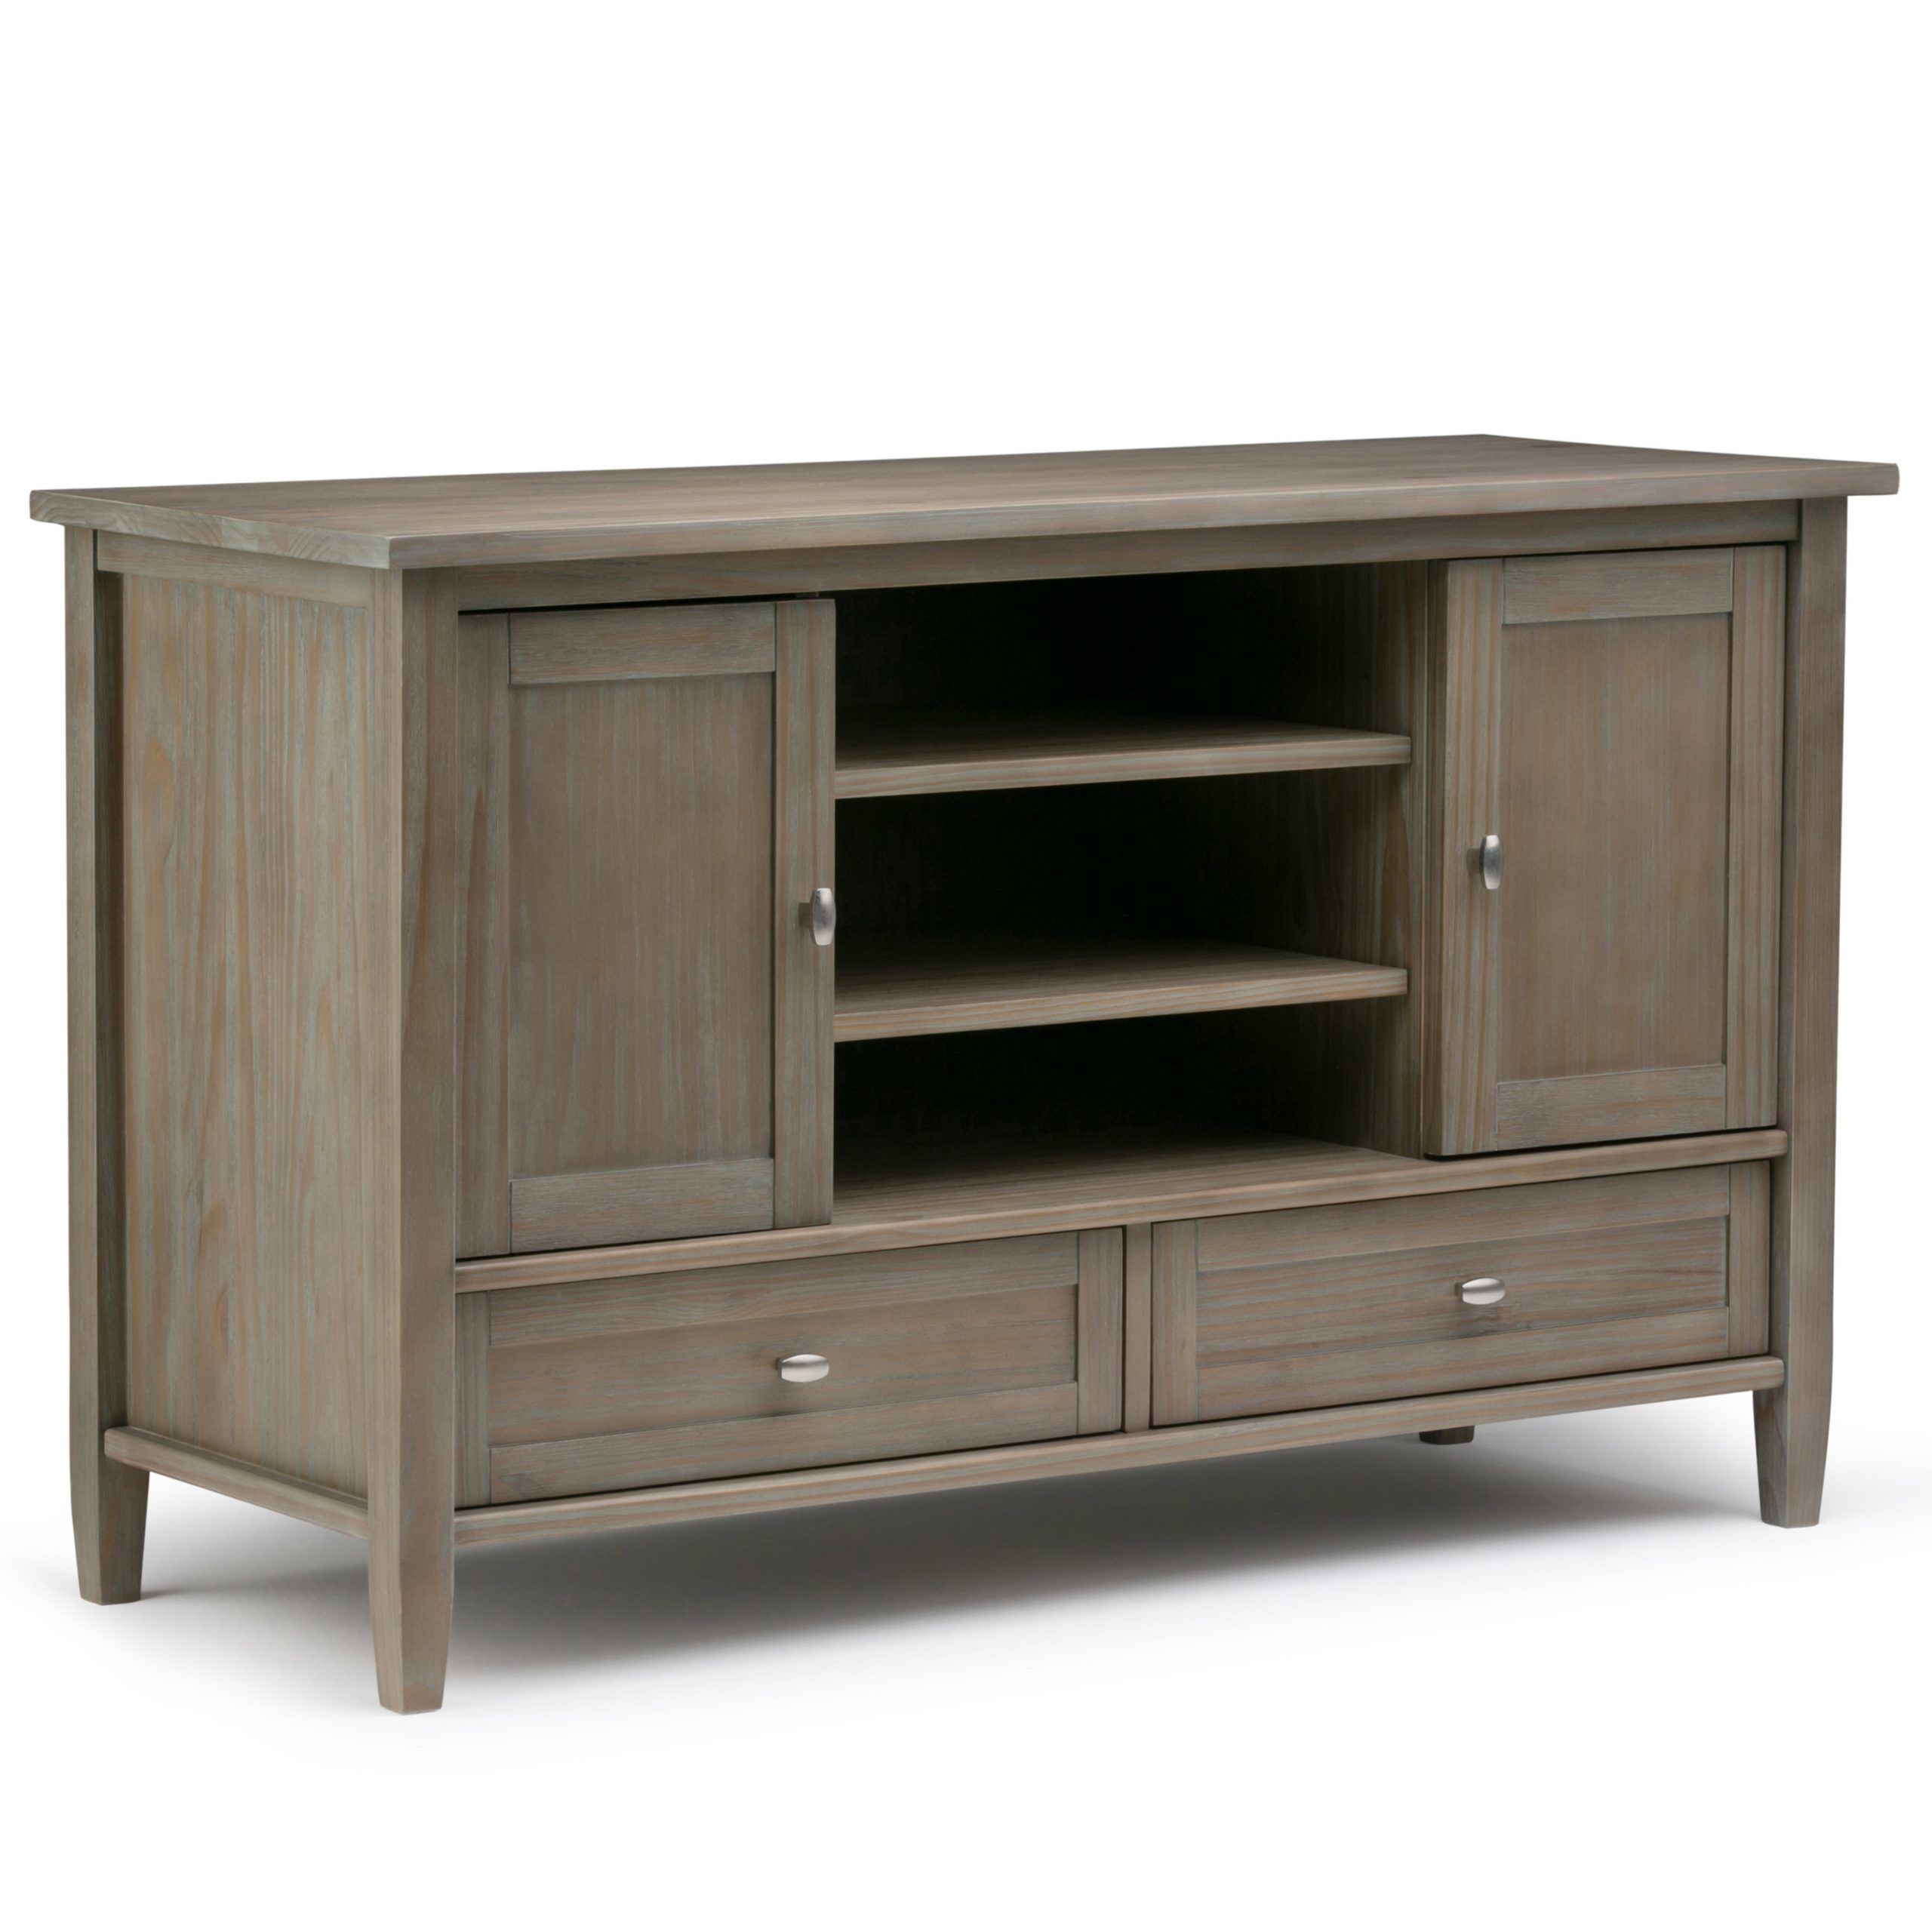 Brooklyn + Max Lexington Solid Wood 47 Inch Wide Rustic Tv Within Greenwich Wide Tv Stands (Gallery 13 of 20)